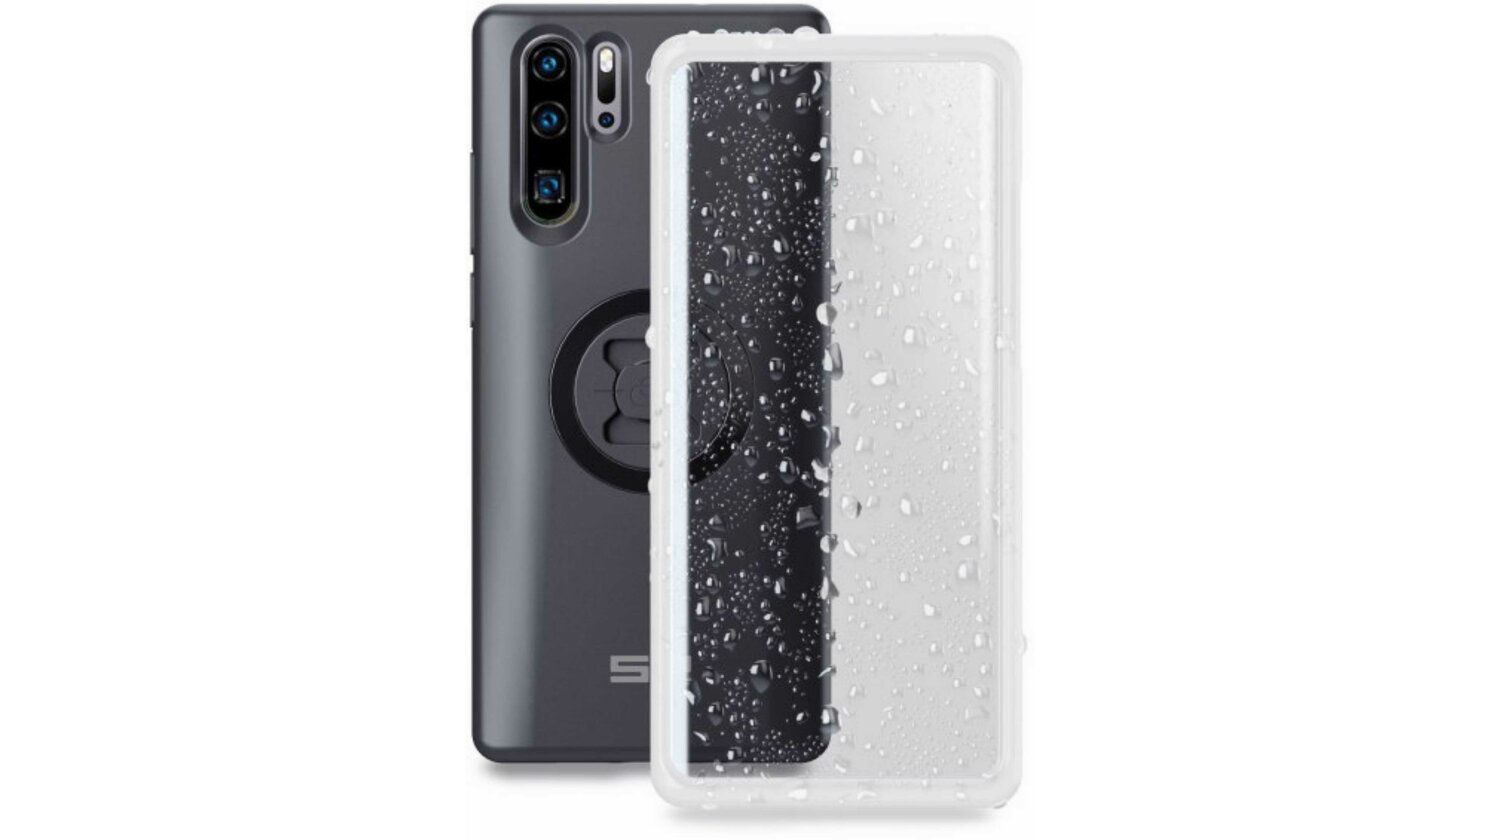 SP Connect Weather Cover Huawei P30 PRO Halterung